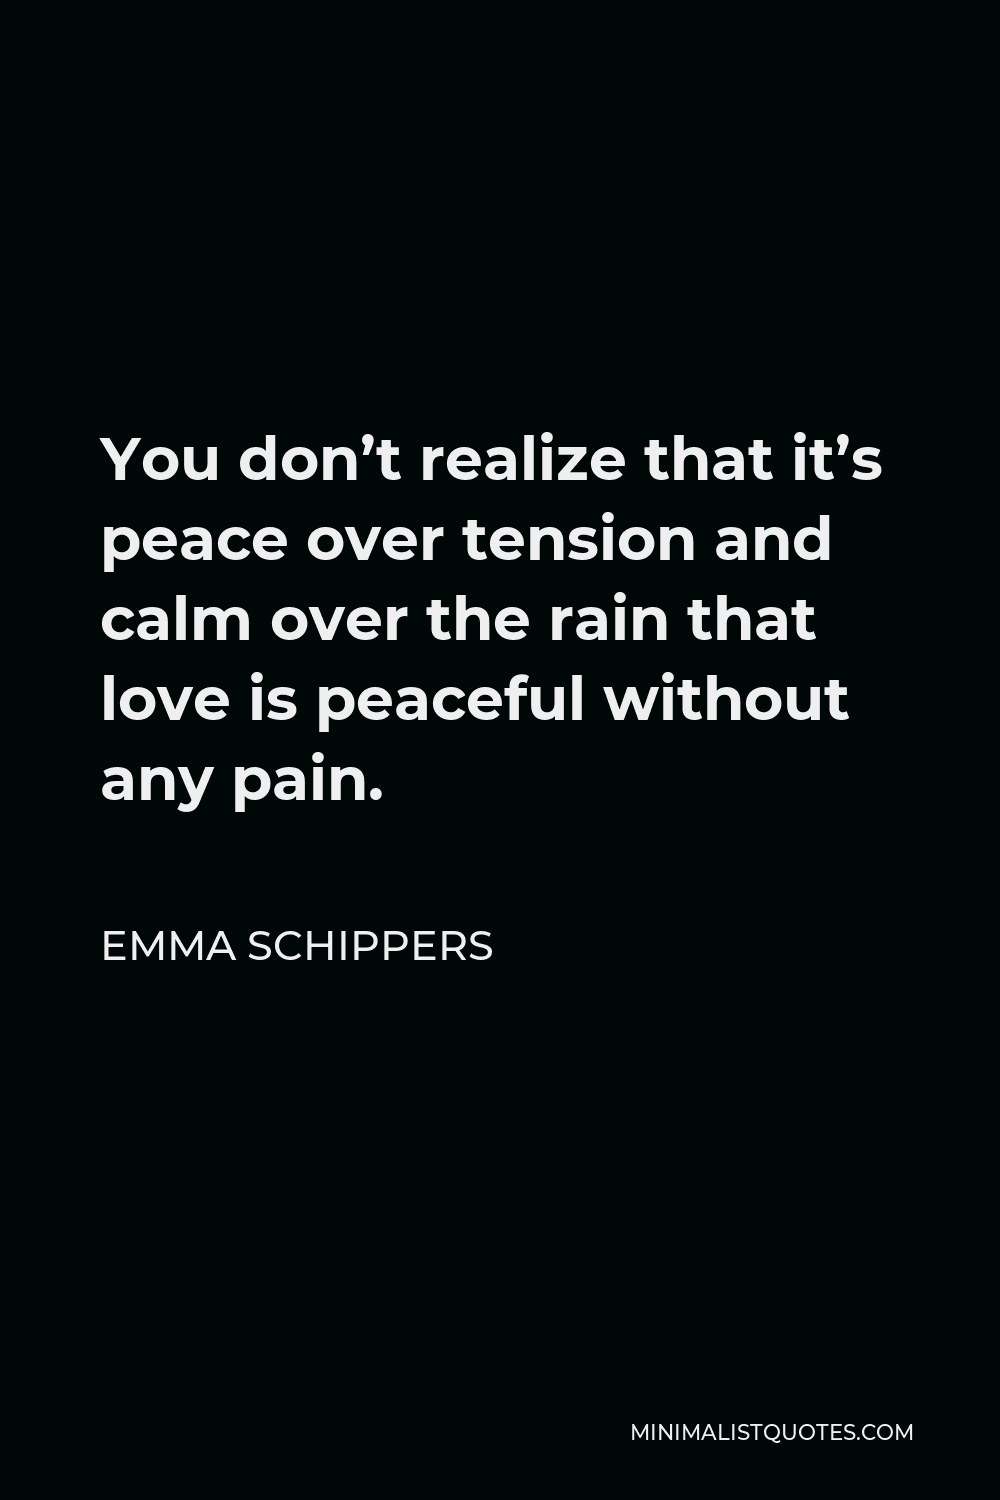 Emma Schippers Quote - You don’t realize that it’s peace over tension and calm over the rain that love is peaceful without any pain.